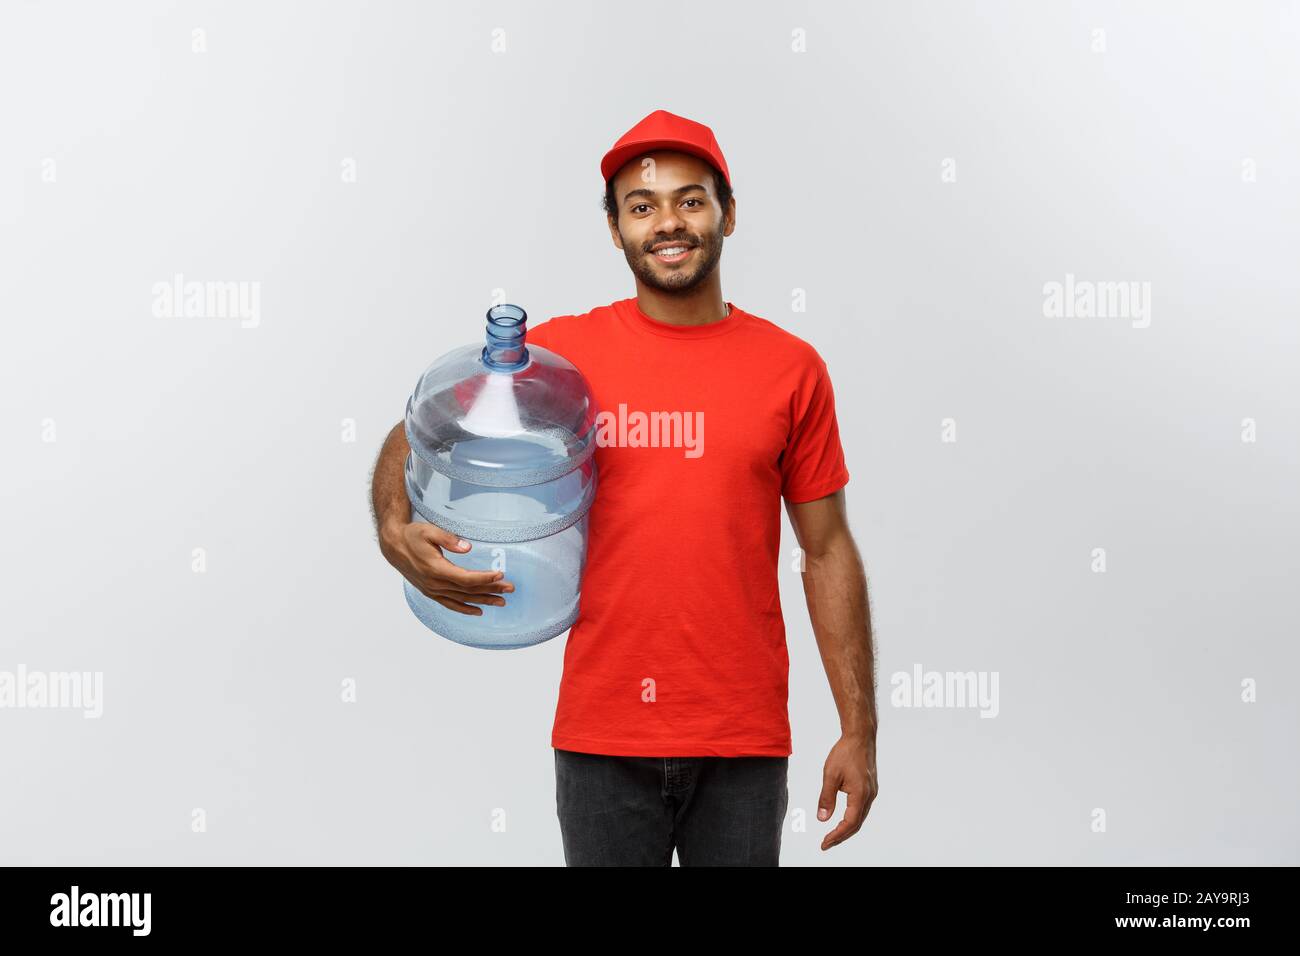 https://c8.alamy.com/comp/2AY9RJ3/delivery-concept-handsome-african-american-delivery-man-holding-water-tank-isolated-on-grey-studio-background-copy-space-2AY9RJ3.jpg